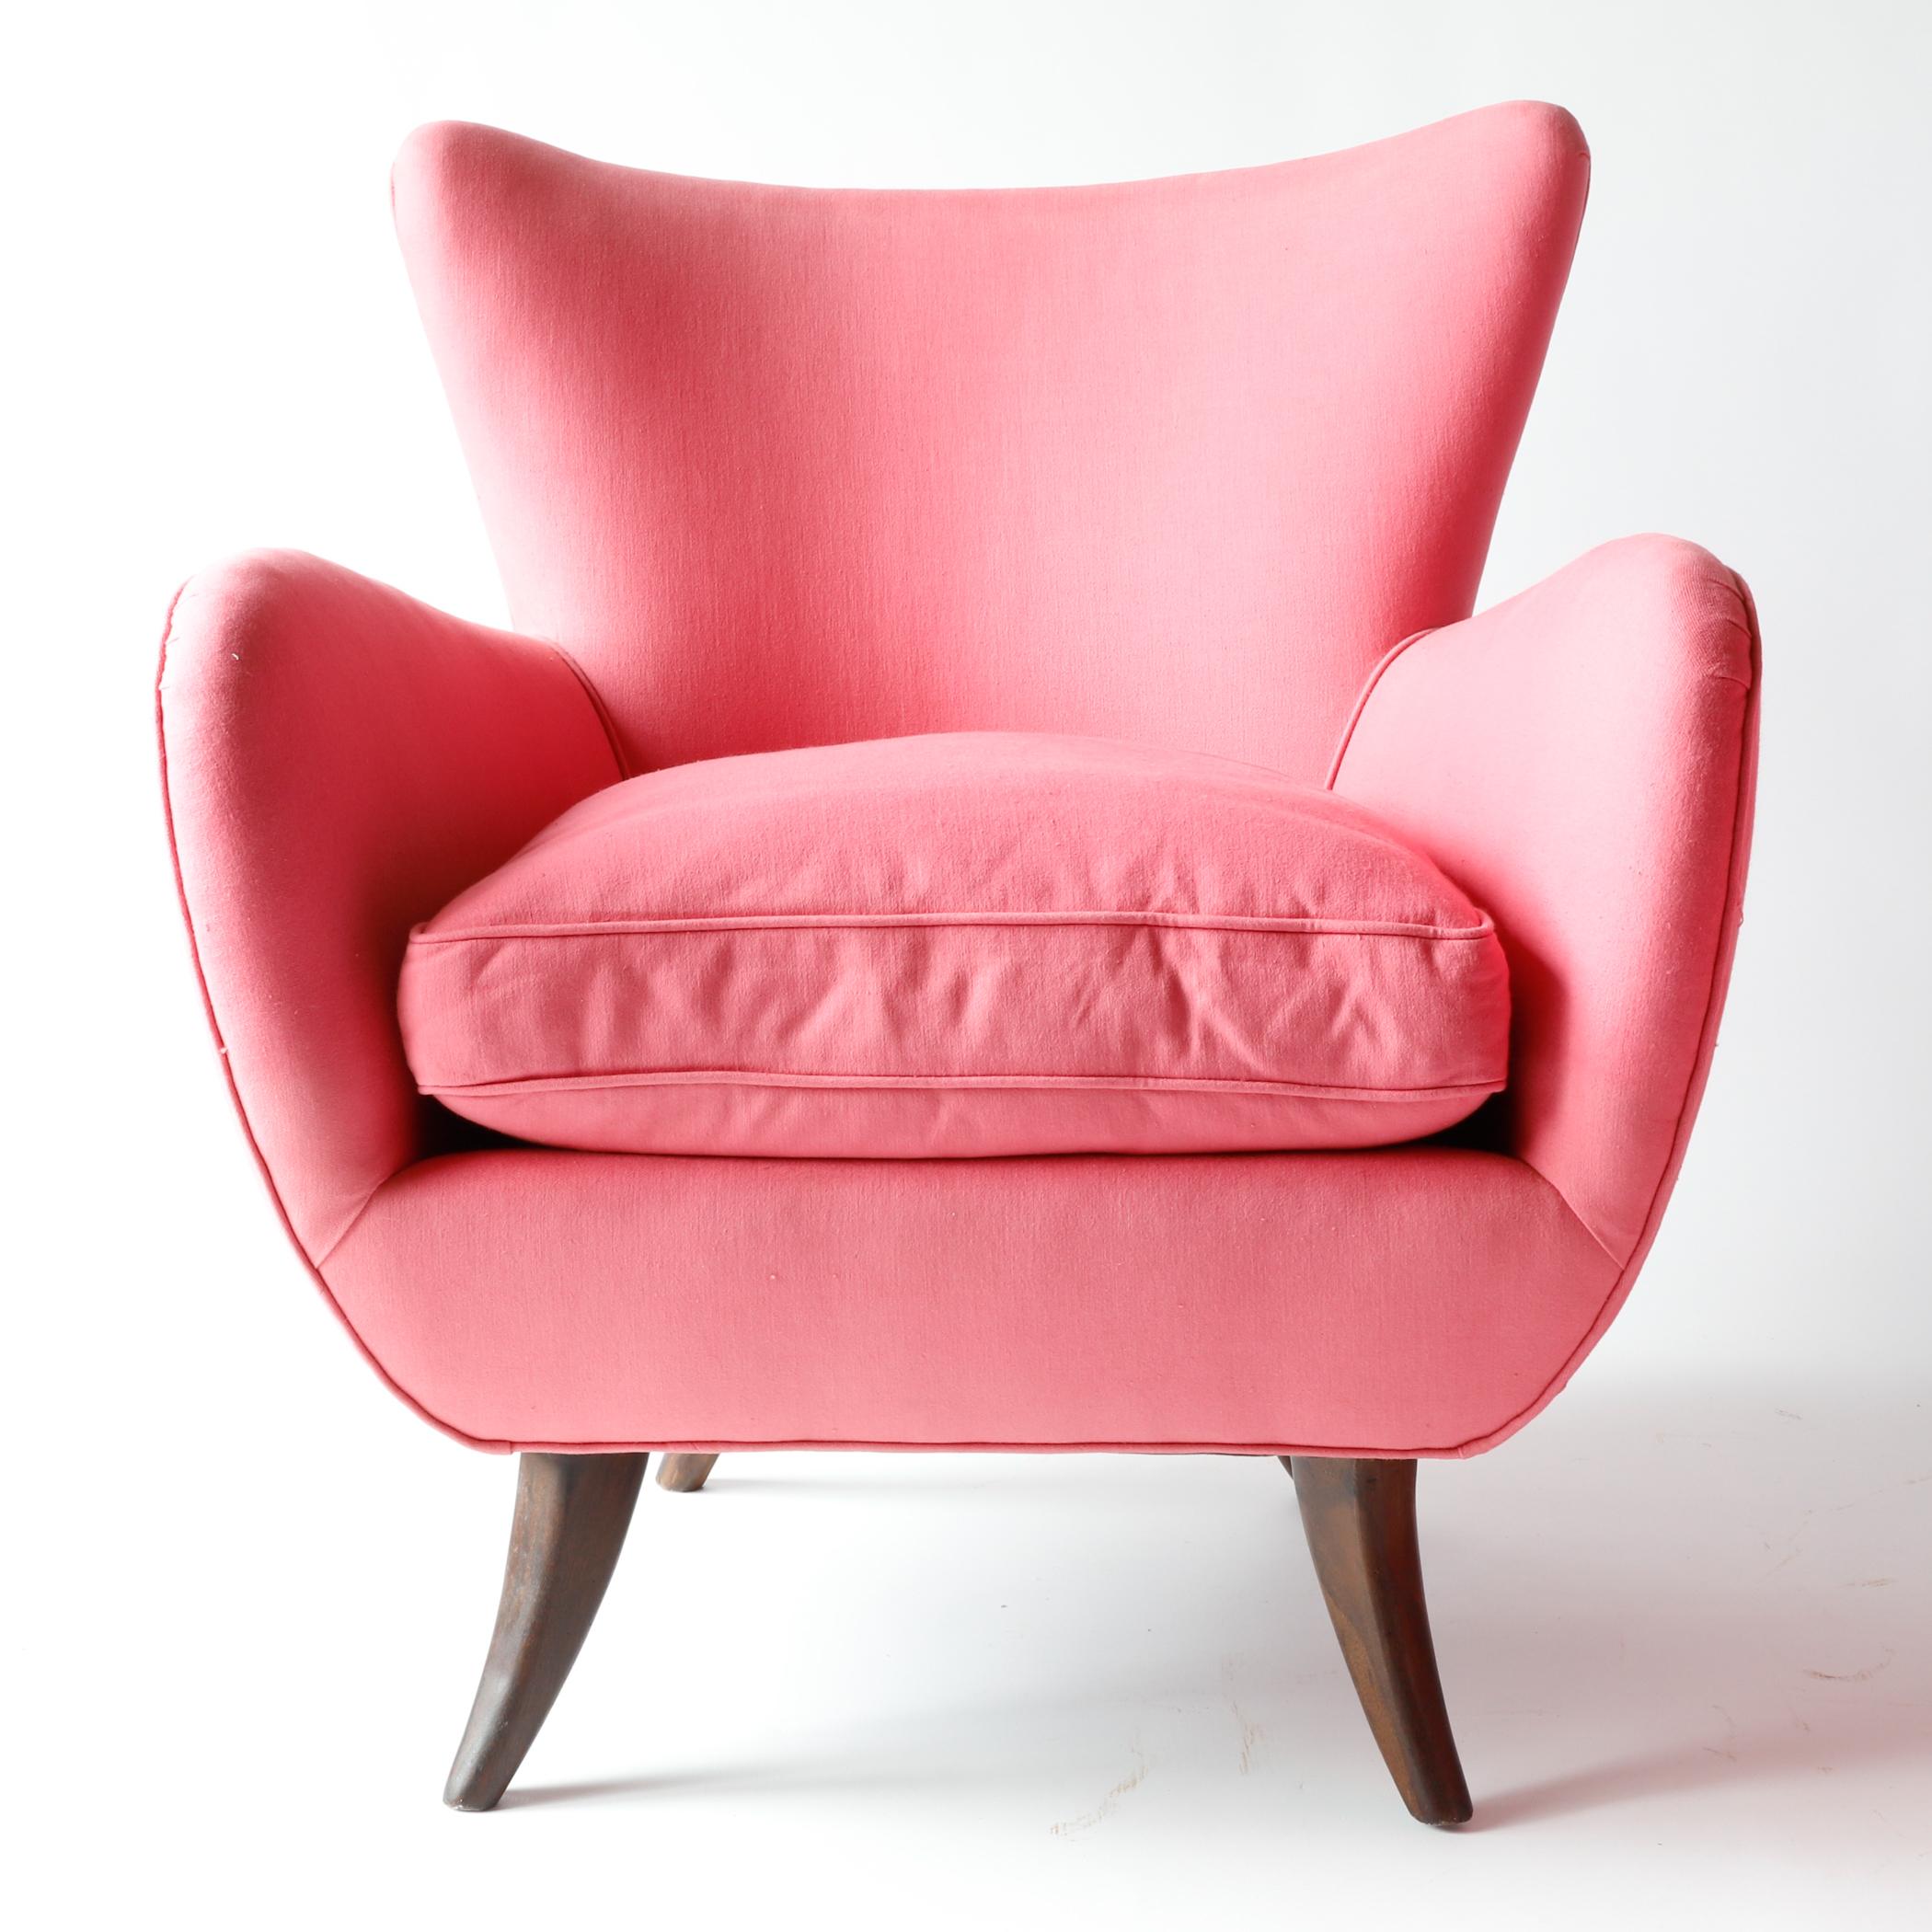 Pair of Ernst Schwadron Upholstered Lounge Chairs, 1940s, Bright Pink In Good Condition For Sale In Raleigh, NC